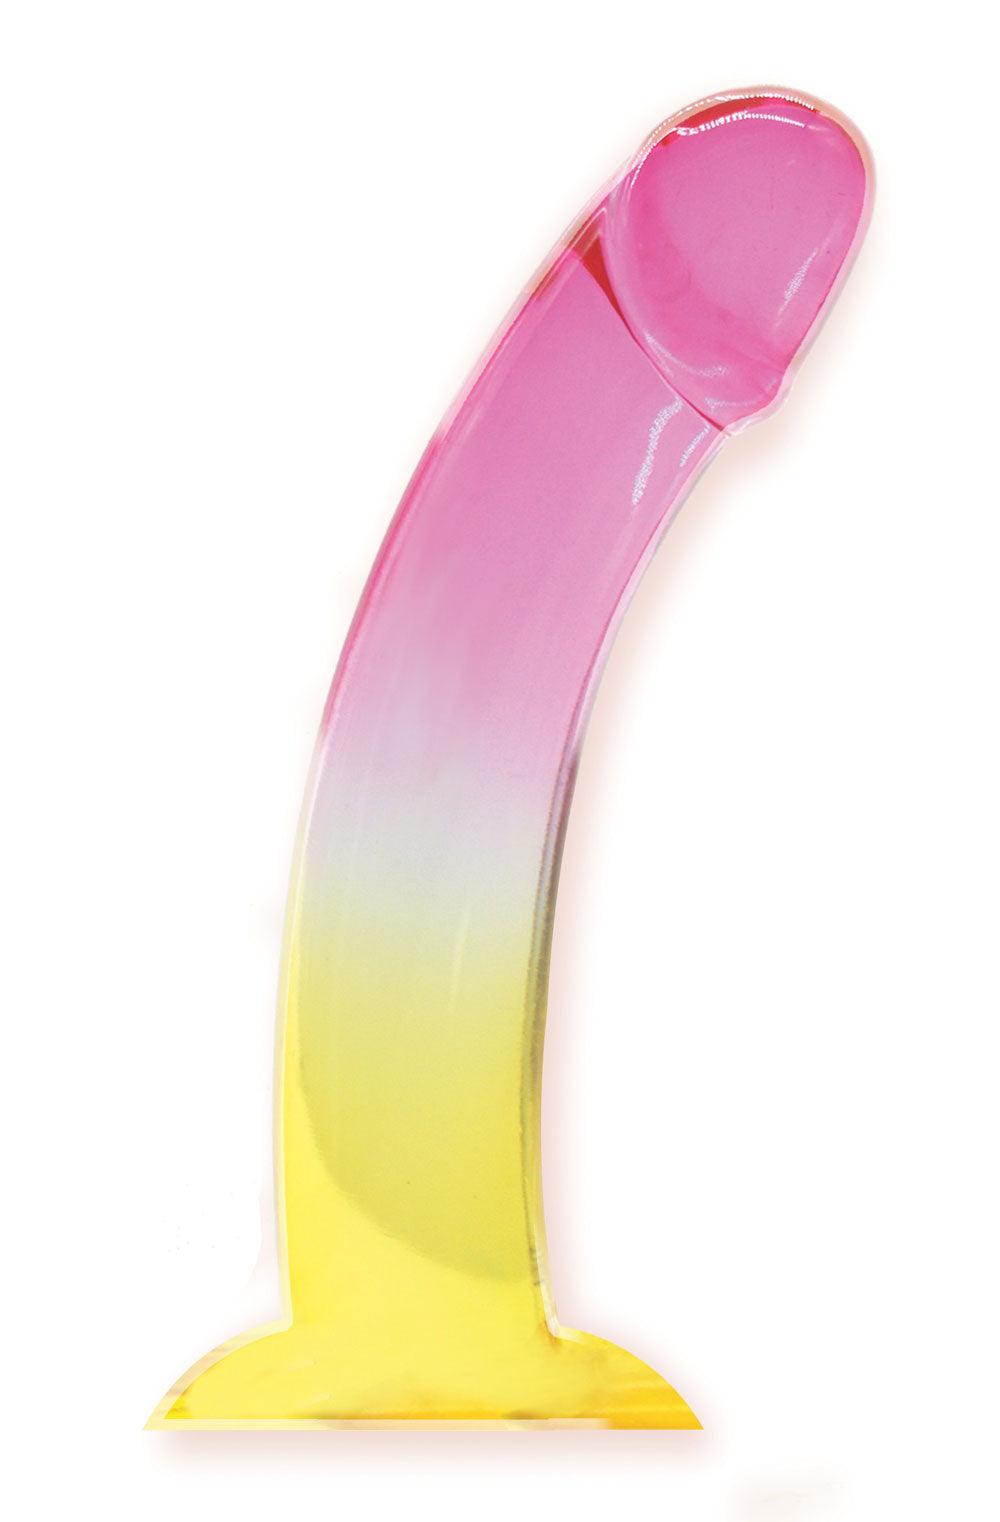 Shades, 8.25" Smoothie Jelly Tpr Gradient Dong - Pink and Yellow - My Sex Toy Hub